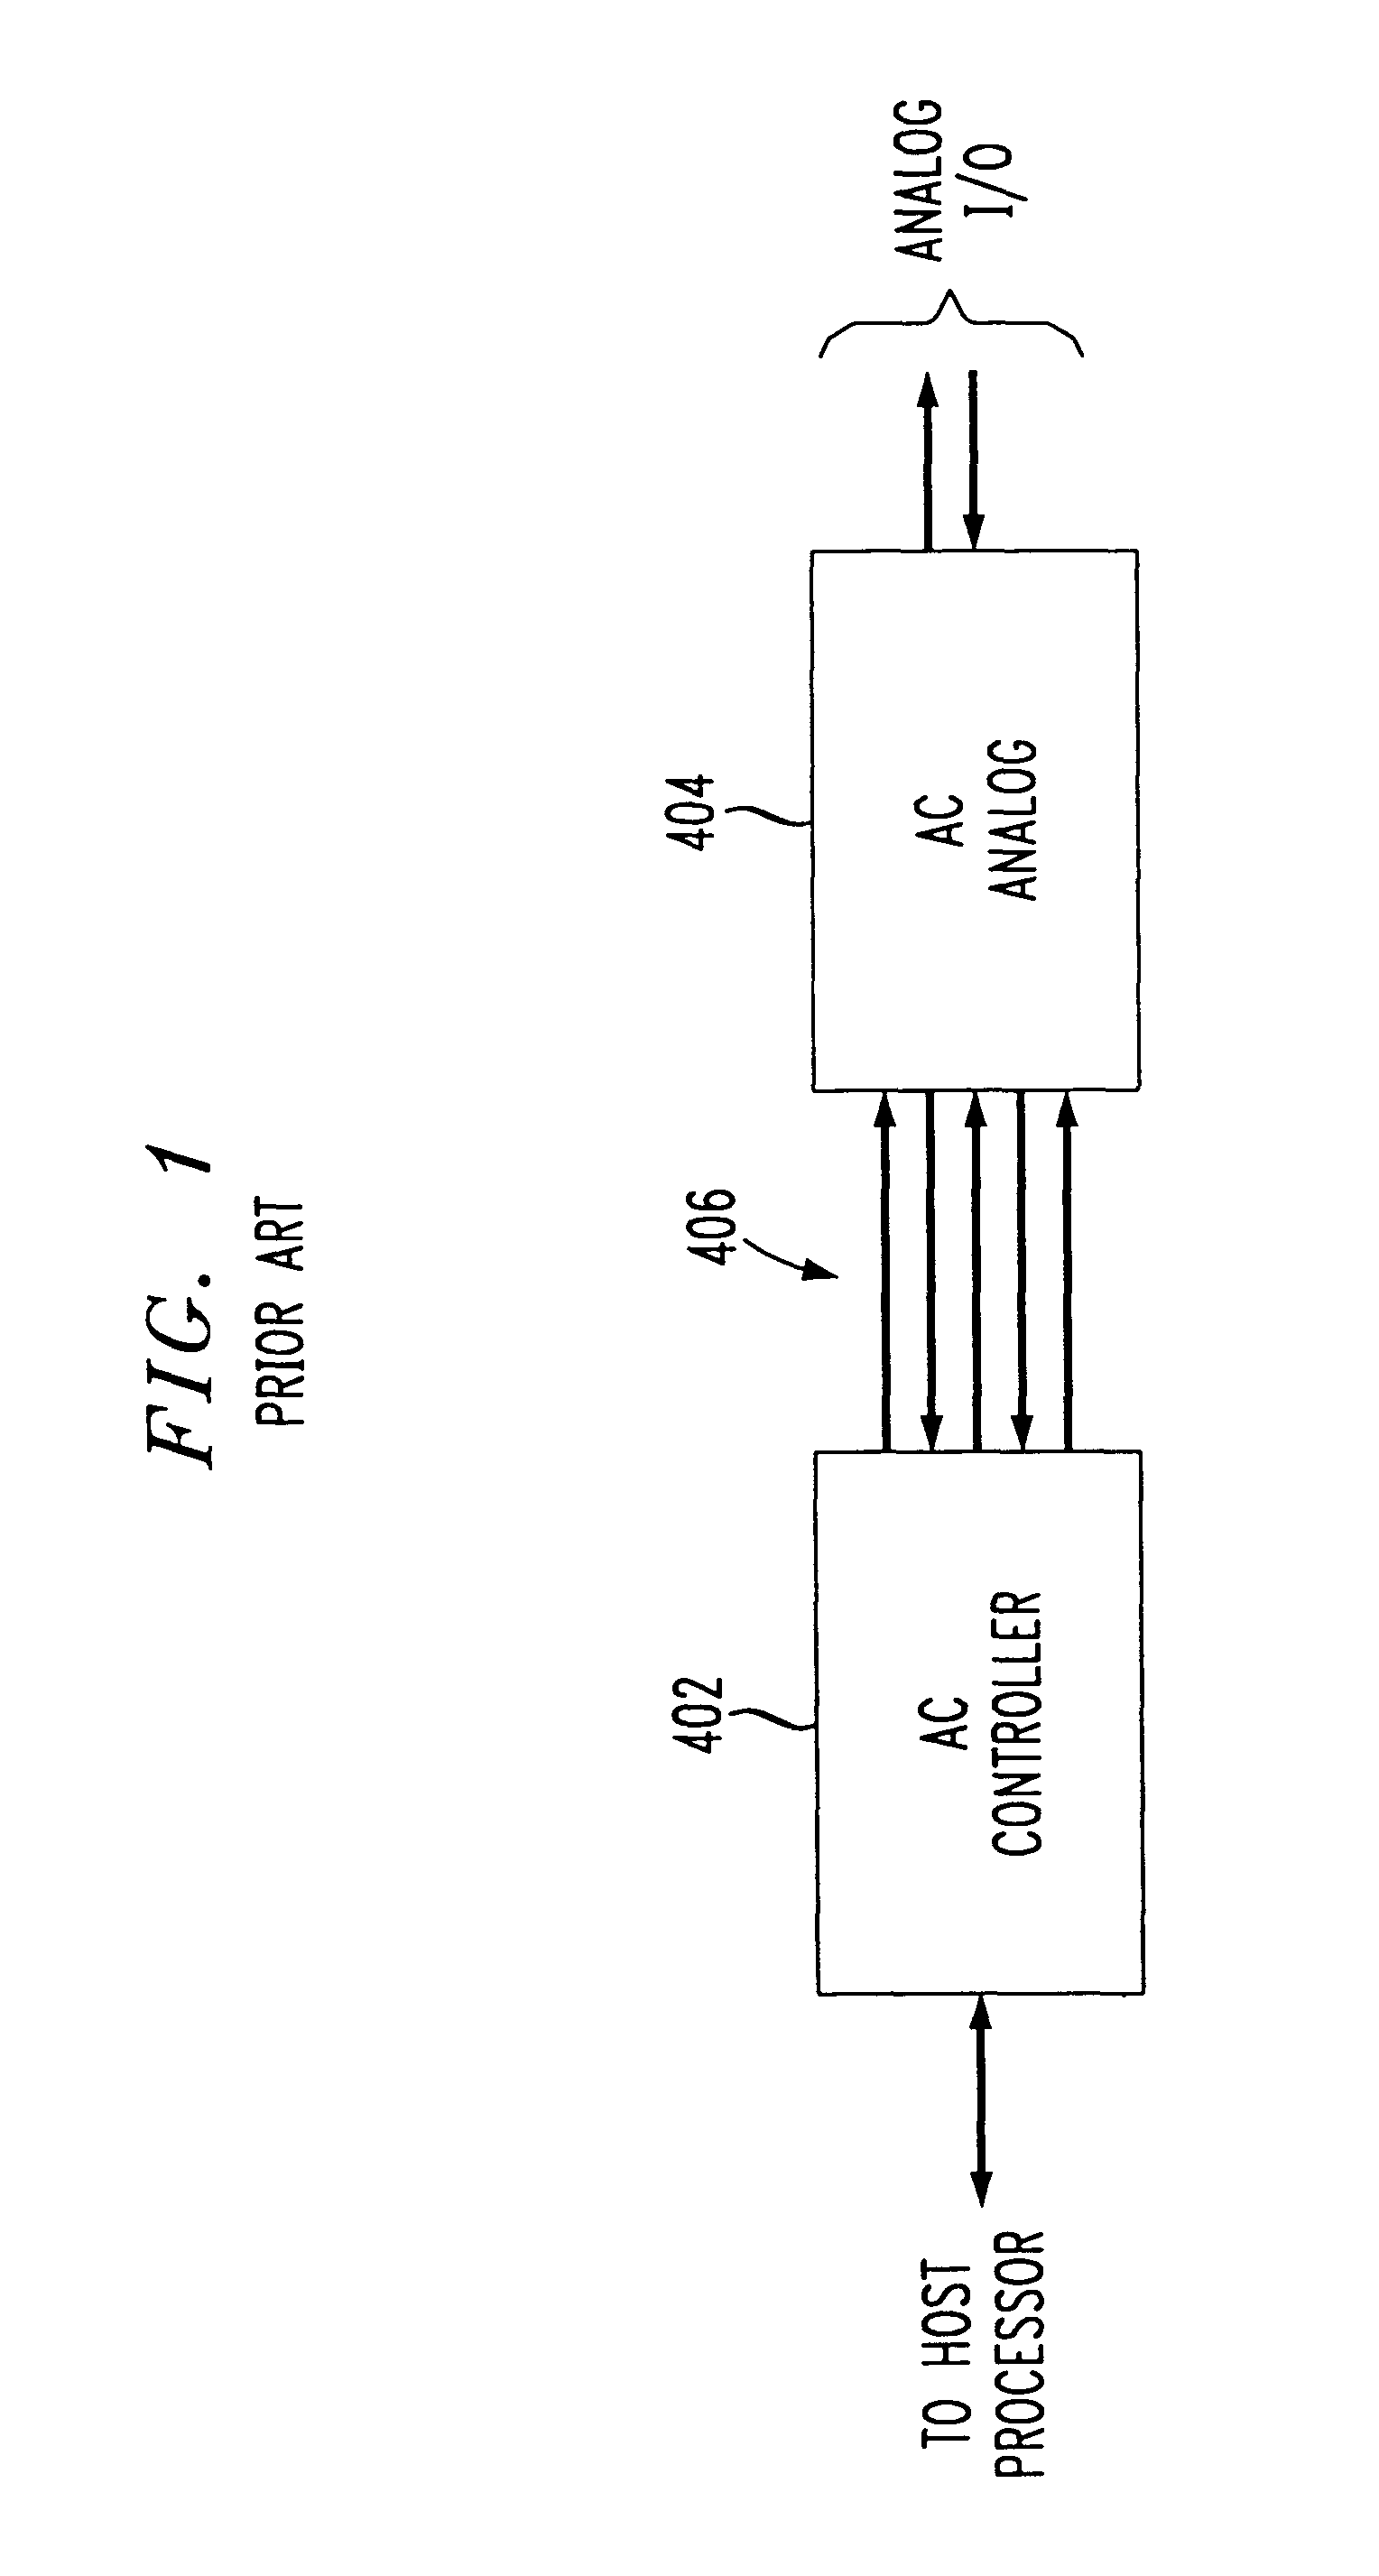 System for digital filtering in a fixed number of clock cycles